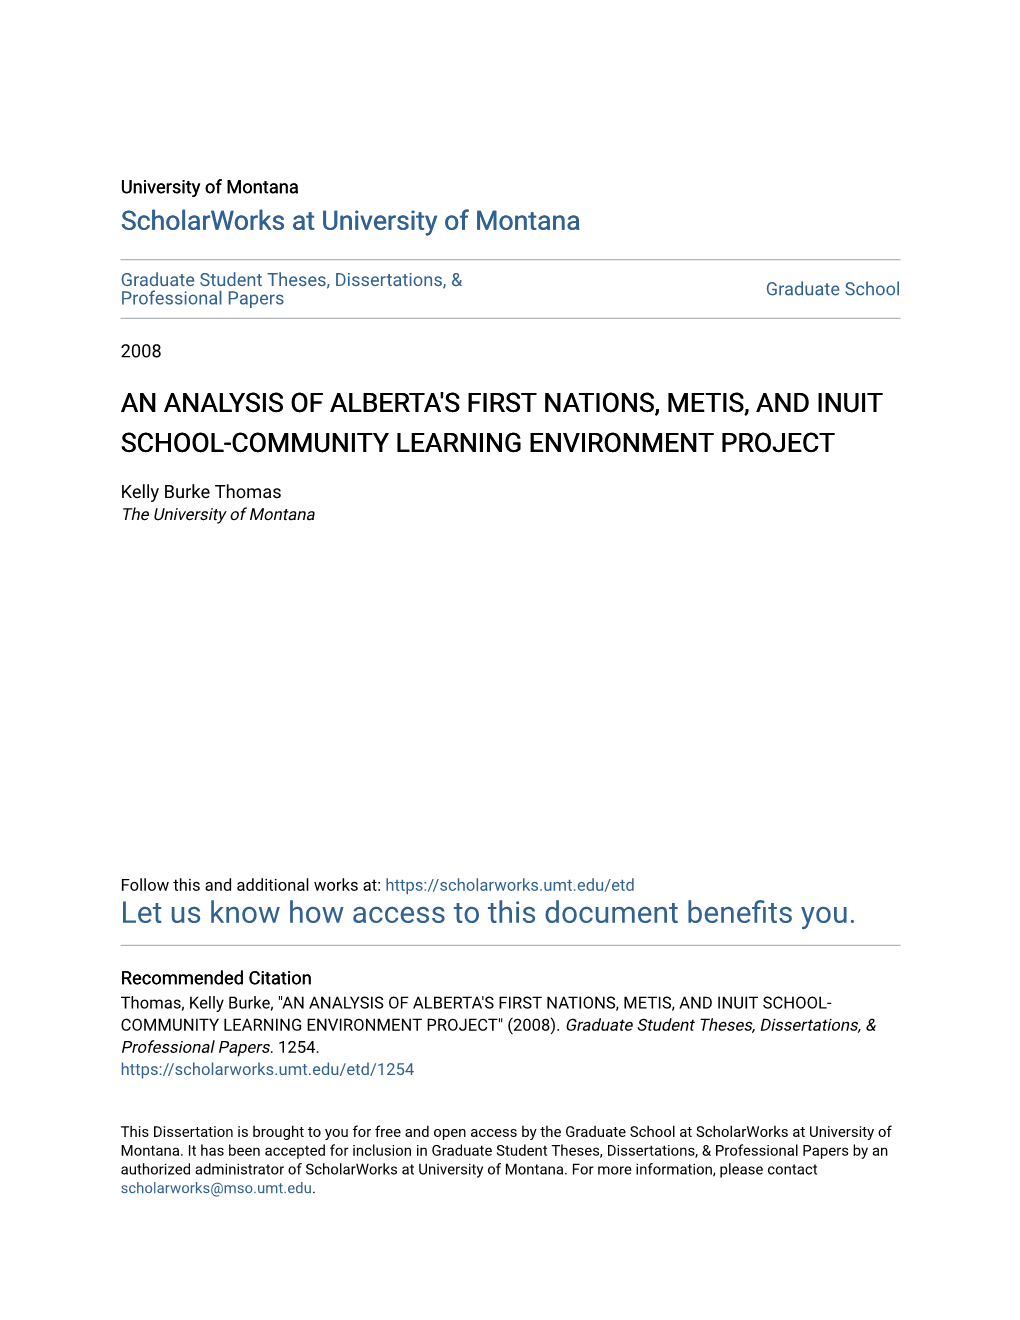 An Analysis of Alberta's First Nations, Metis, and Inuit School-Community Learning Environment Project